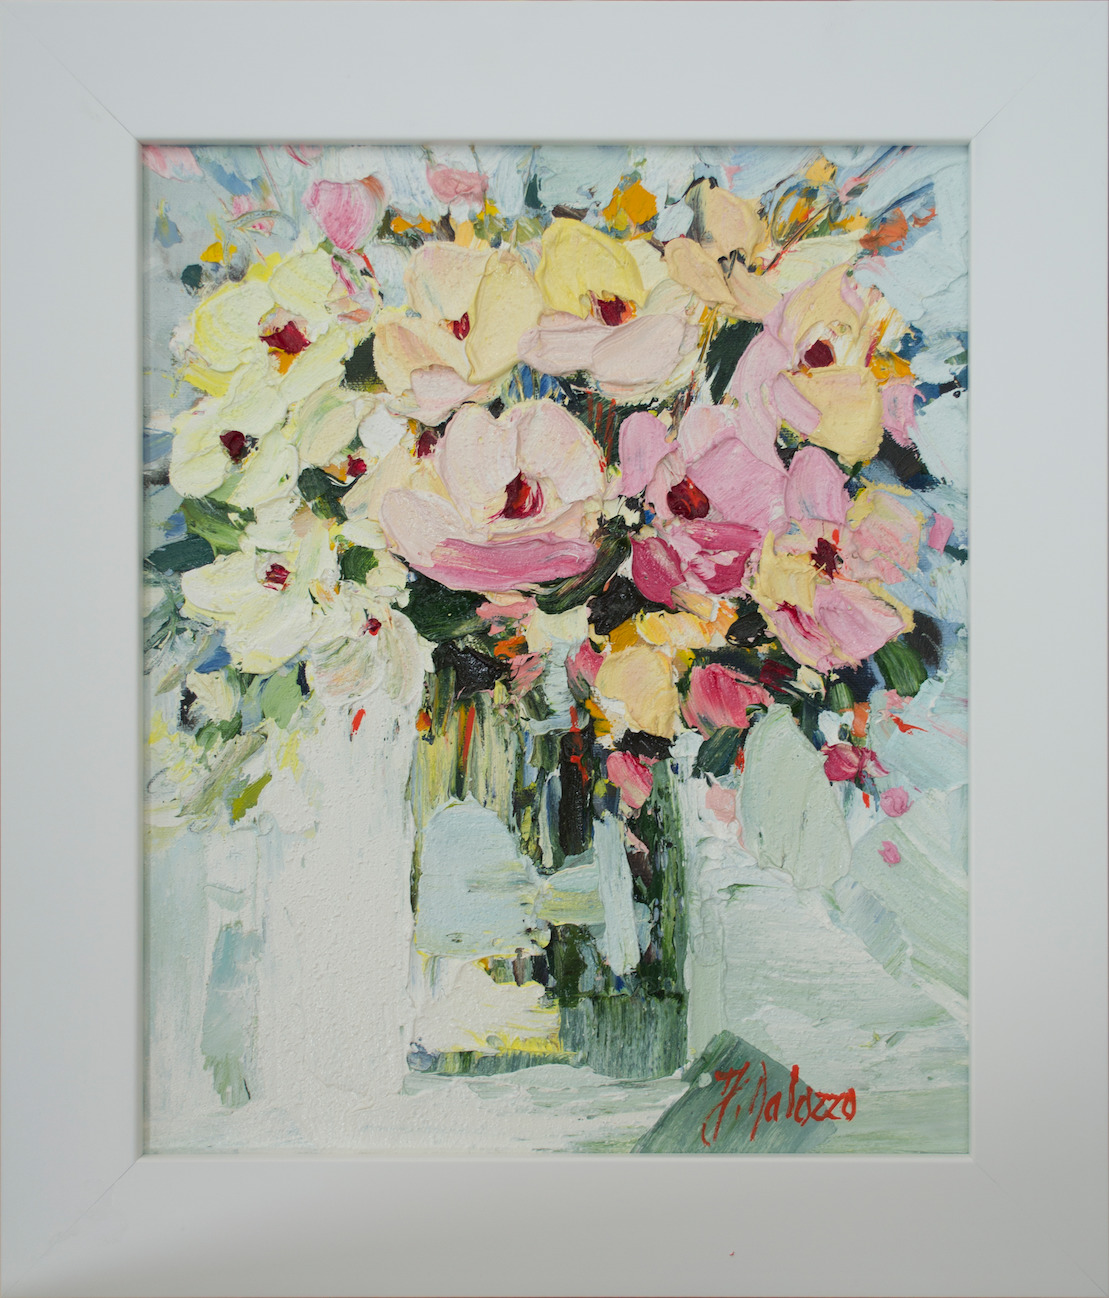 Framed Front View Of Still Life Painting "Eternal Bloom" By Judith Dalozzo